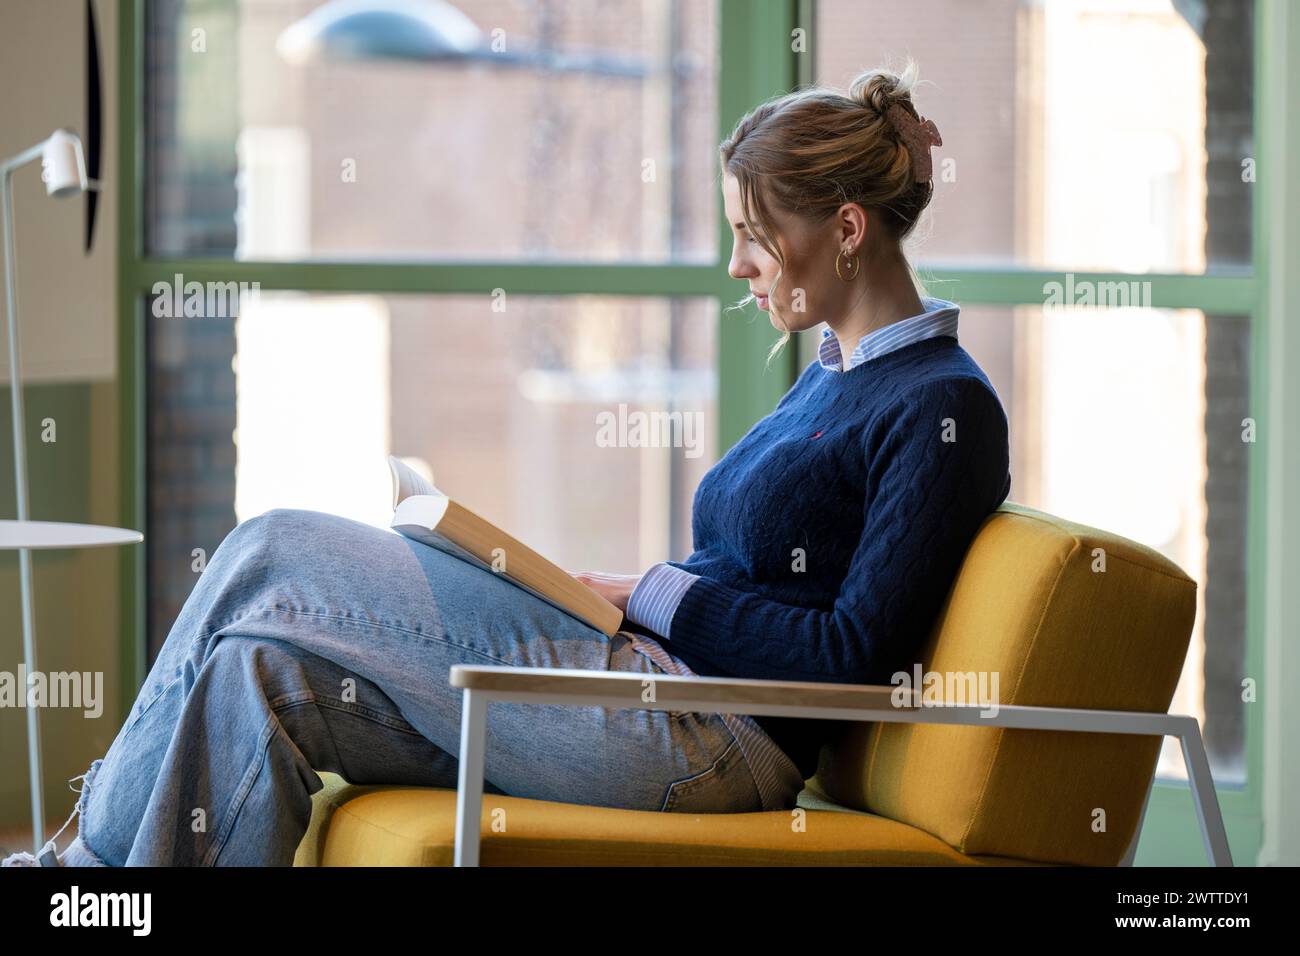 A moment of tranquility Woman engrossed in a book on a sunny afternoon. Stock Photo